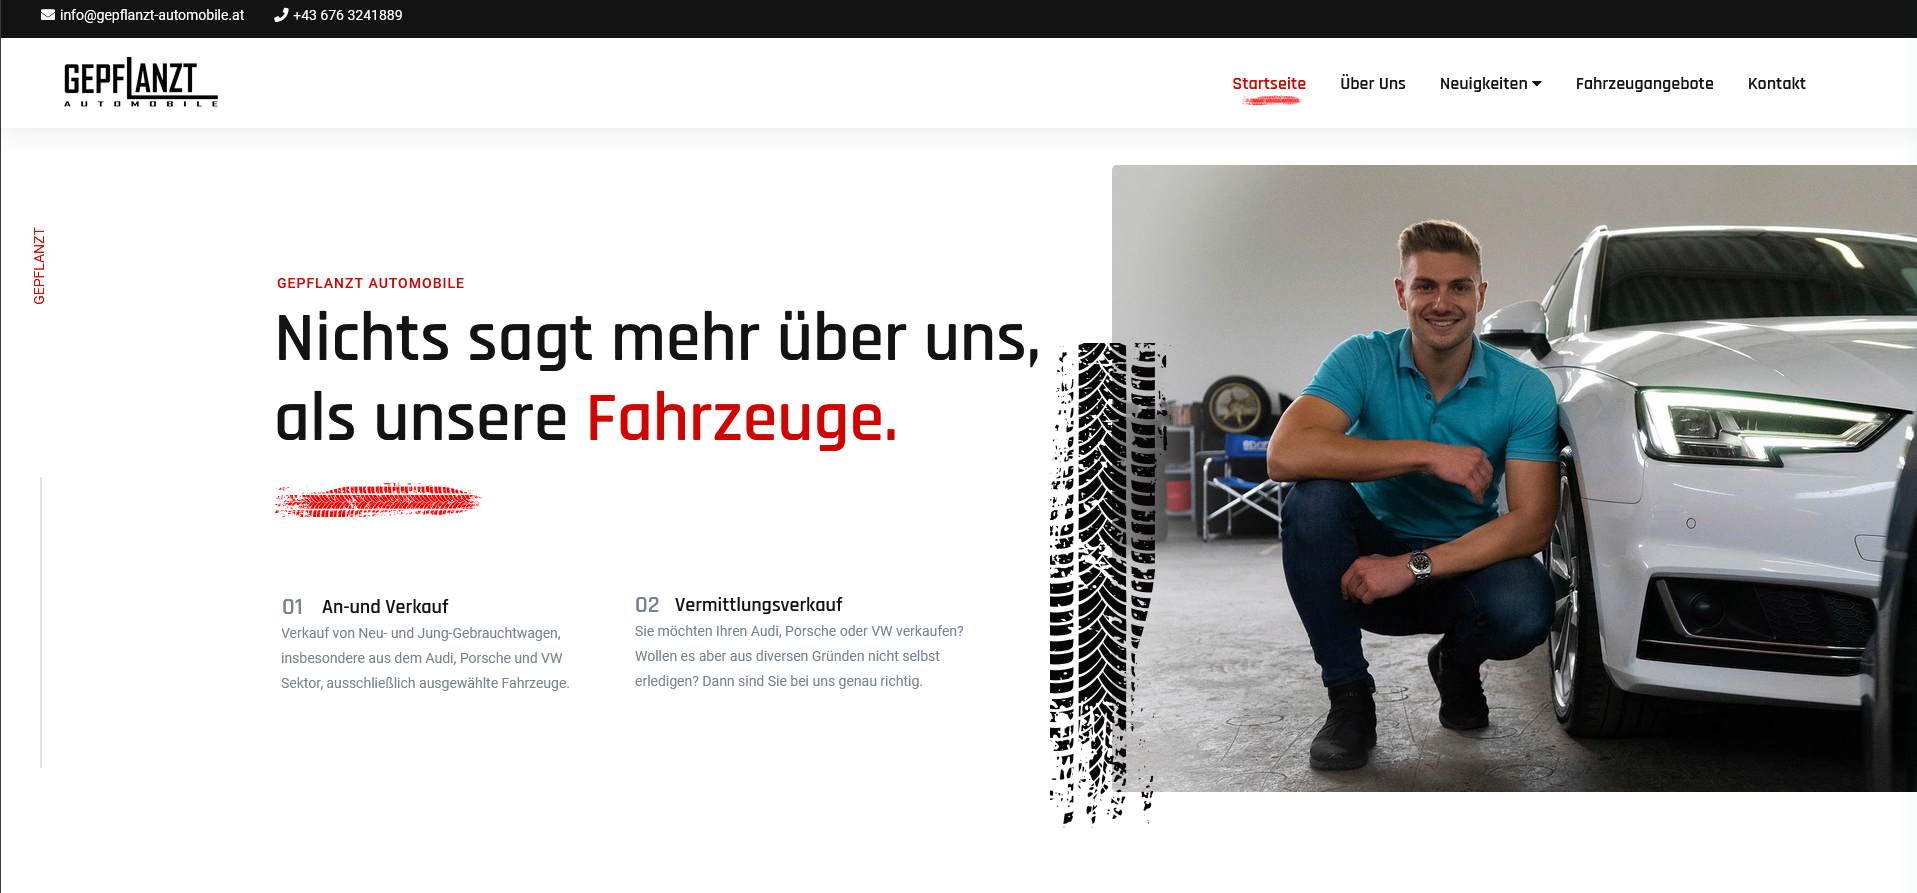 (c) Gepflanzt-automobile.at